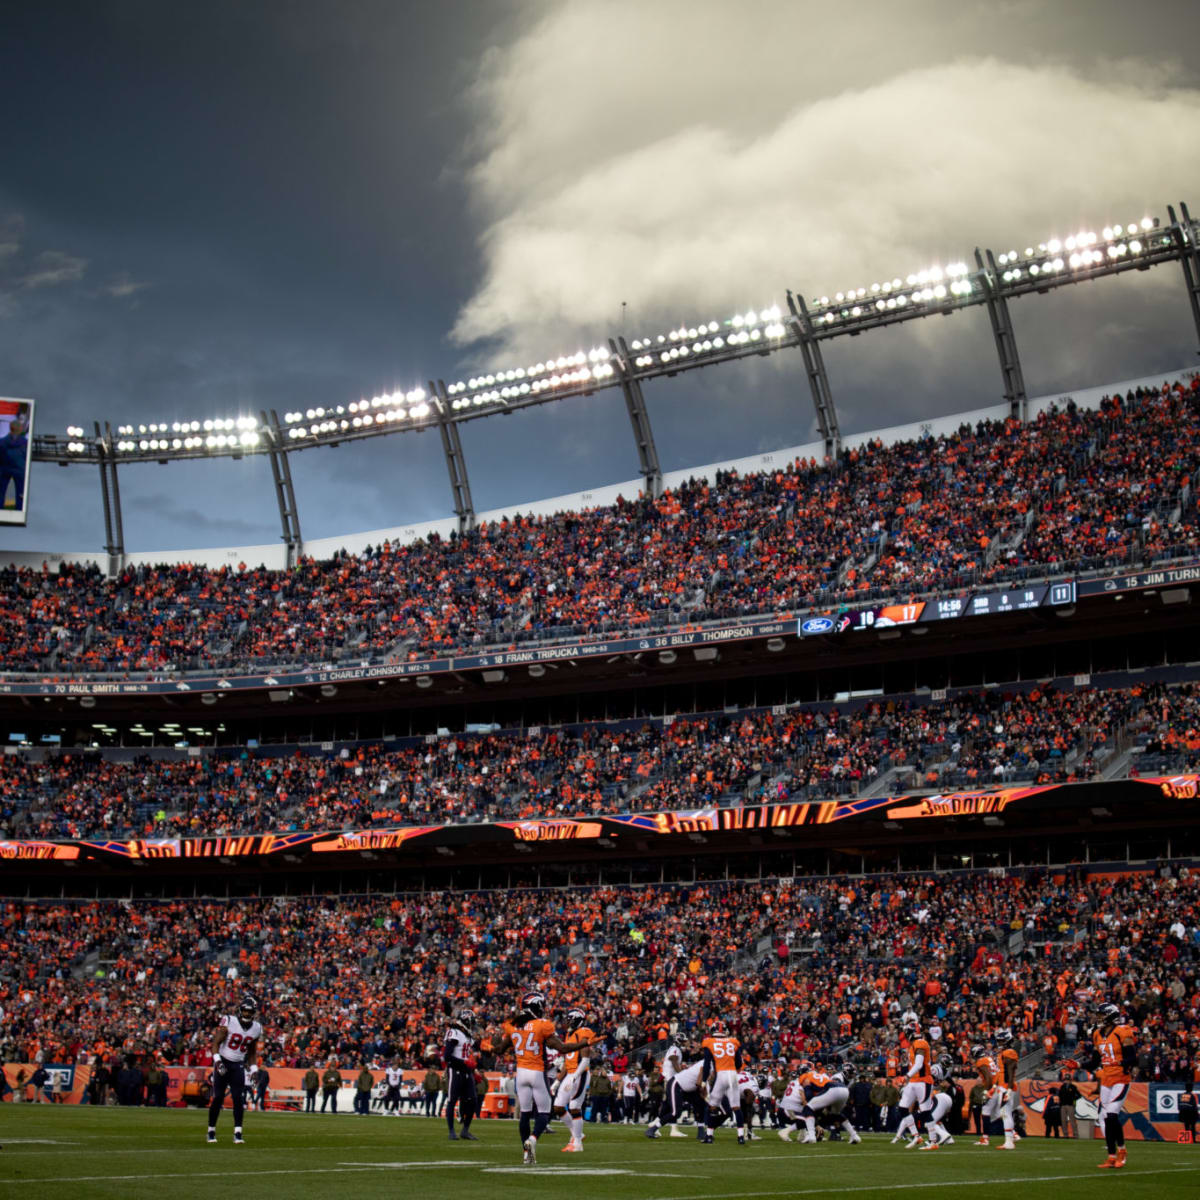 Denver Broncos stadium Empower Field at Mile High on fire as dark clouds of  smoke billow from building